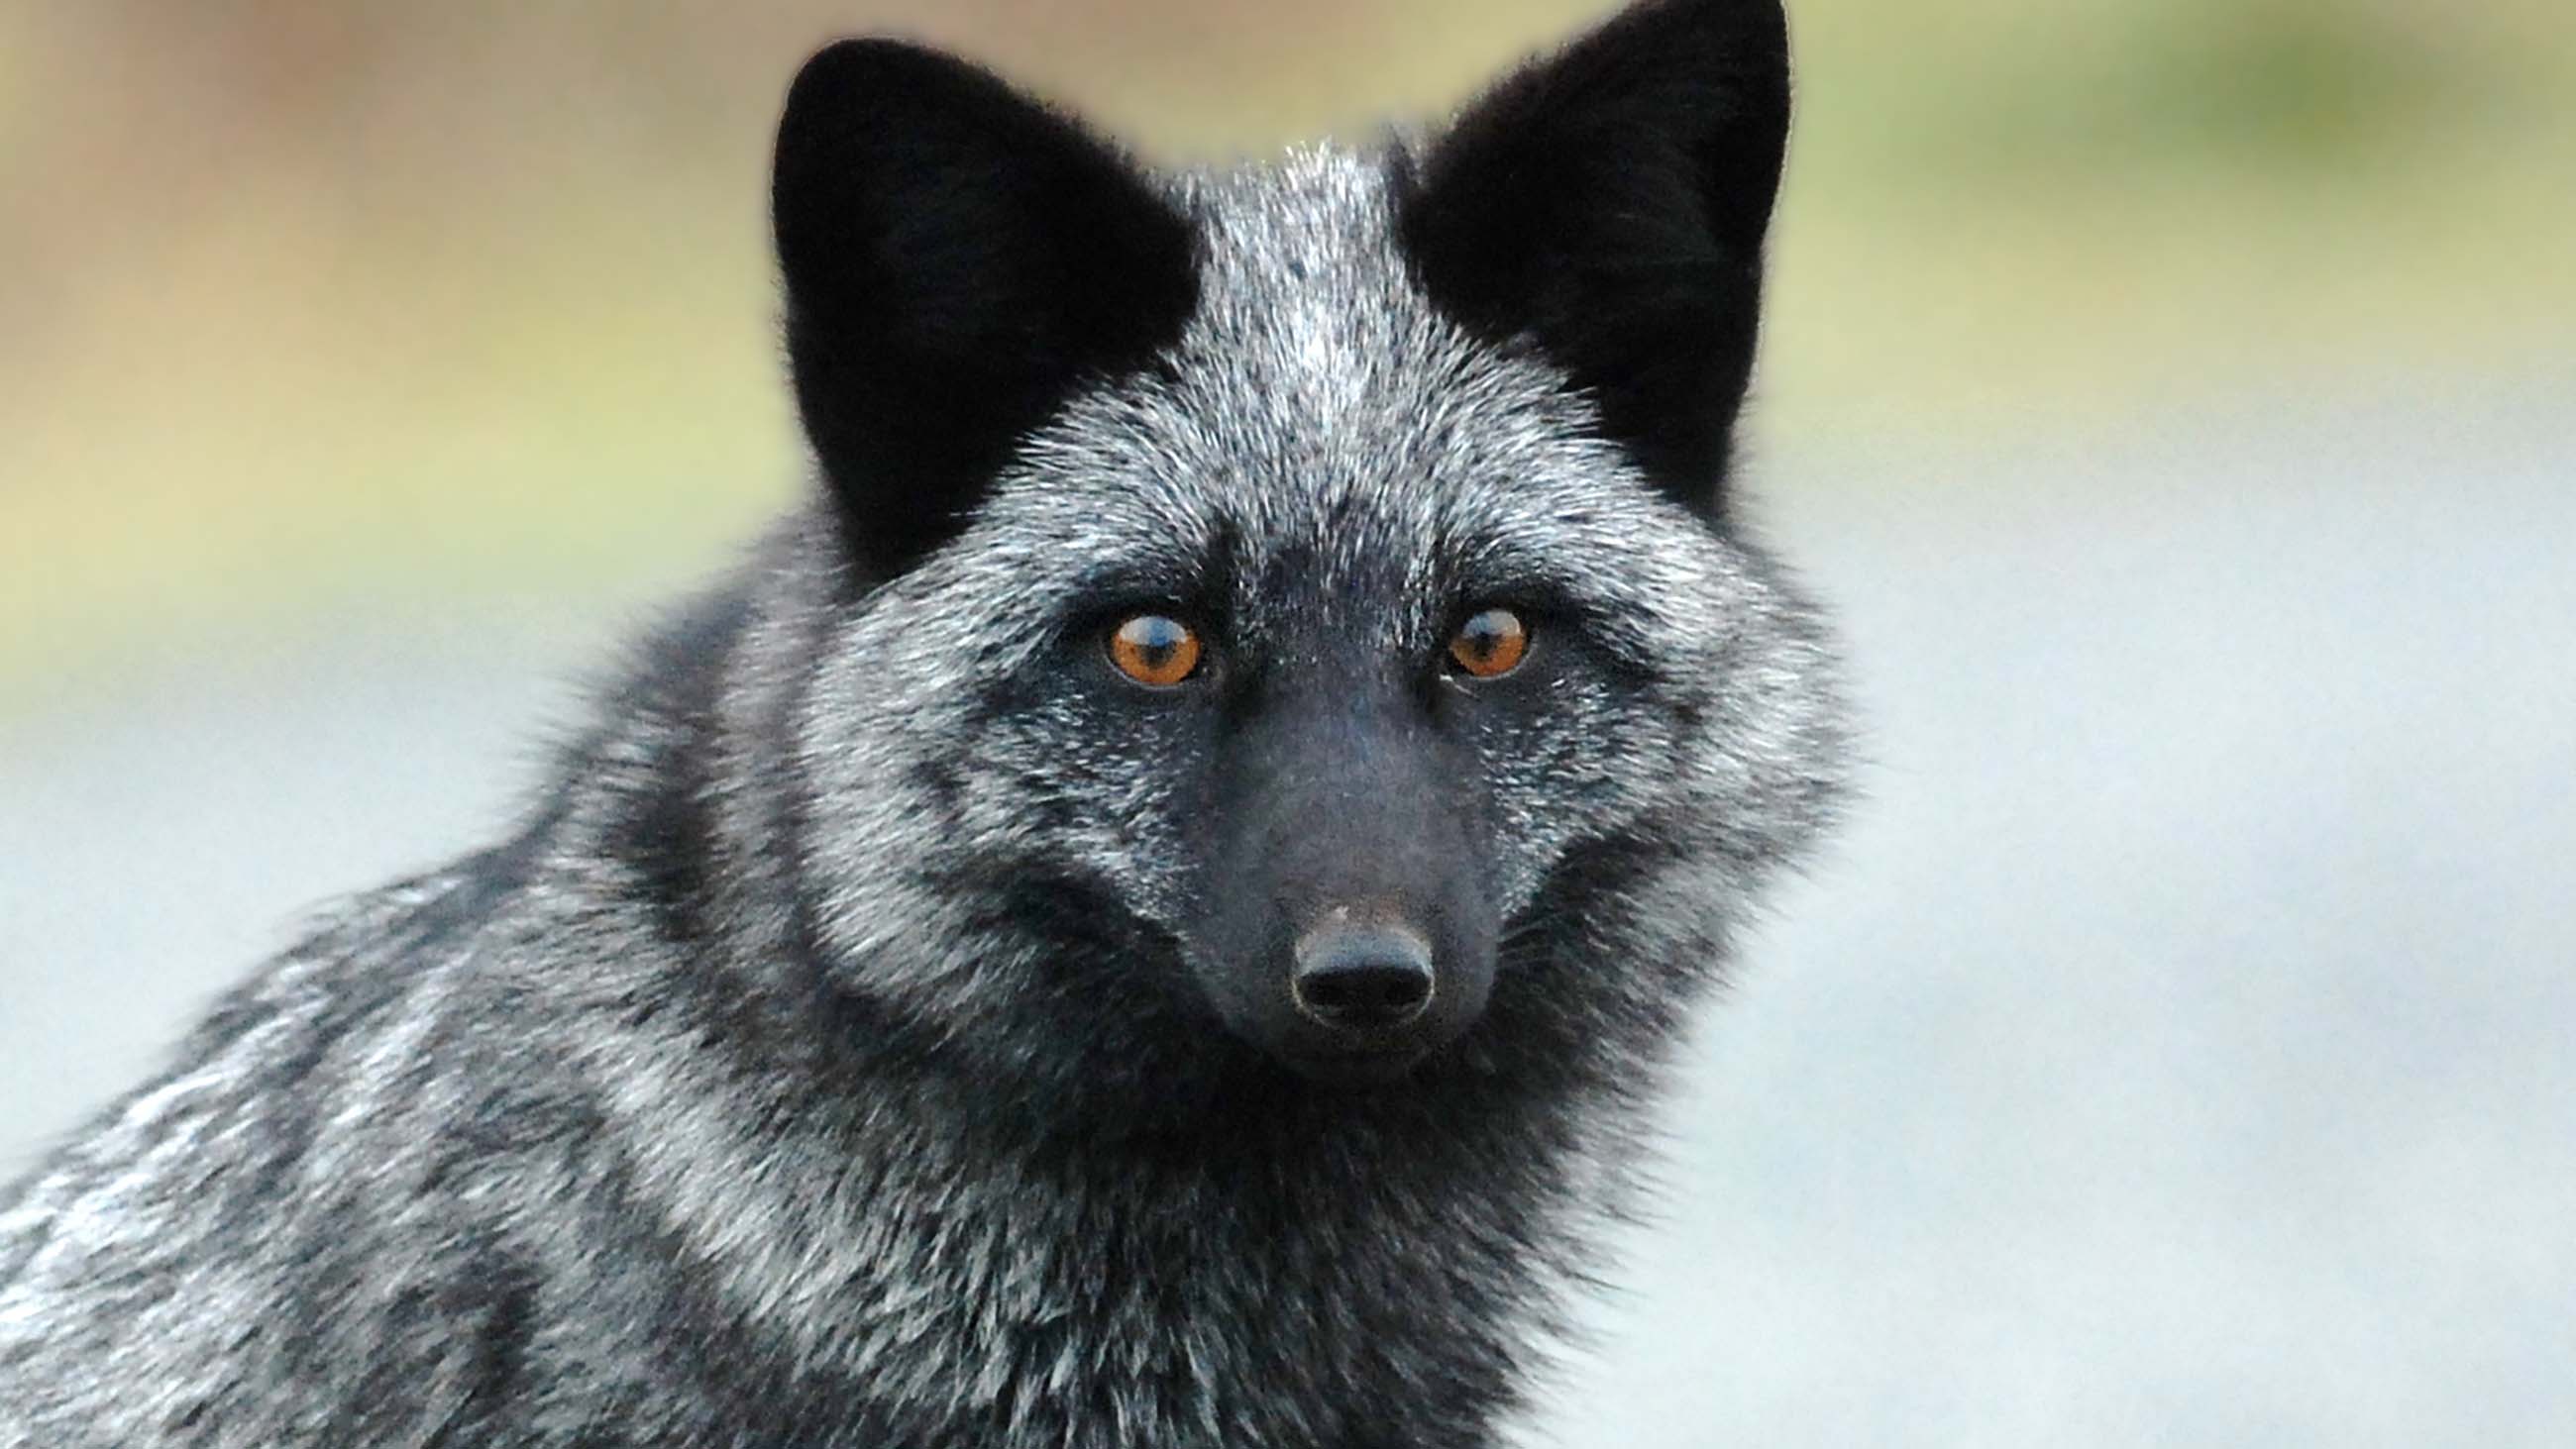 While most foxes are aggressive or agitated around people, a few seem to have an innate calmness.